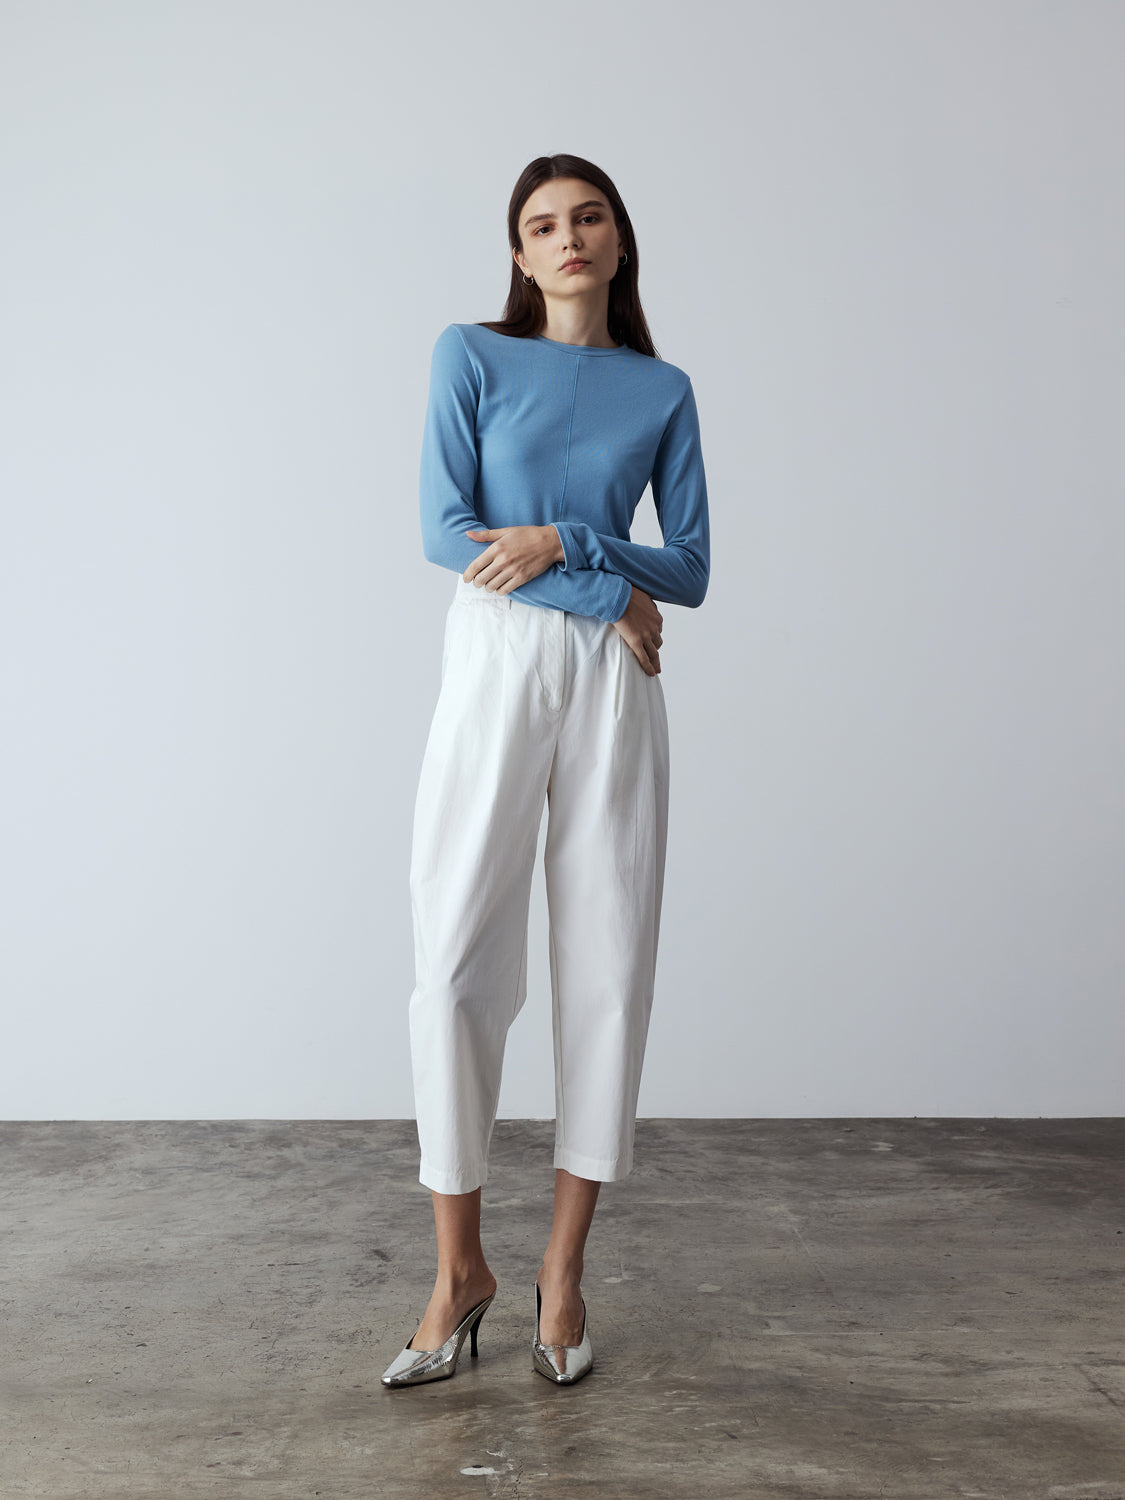 white : Model is wearing the Cotton Tailored Trousers in White, which comes high-waisted with slash pockets at the sides, a concealed zip-fly closure and pleated details. Worn with the Fitted Long Sleeve T-Shirt in Blue and metallic silver heels.